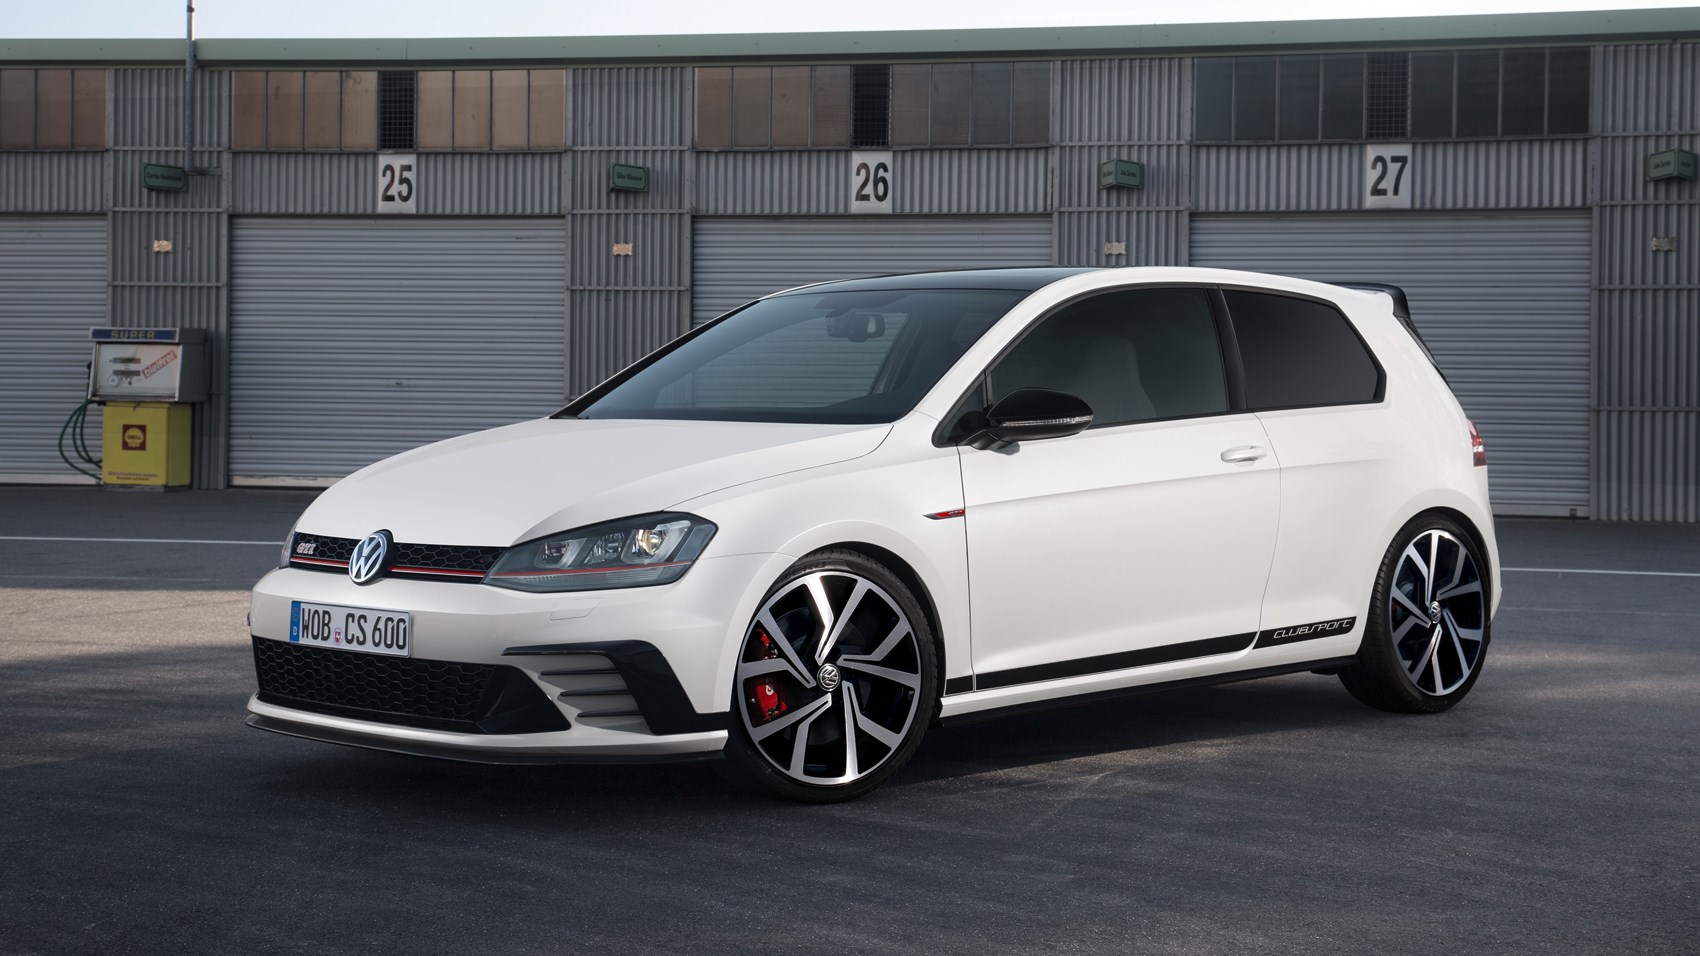 Limited-edition Volkswagen Golf GTI 40 launching in June | Practical ...